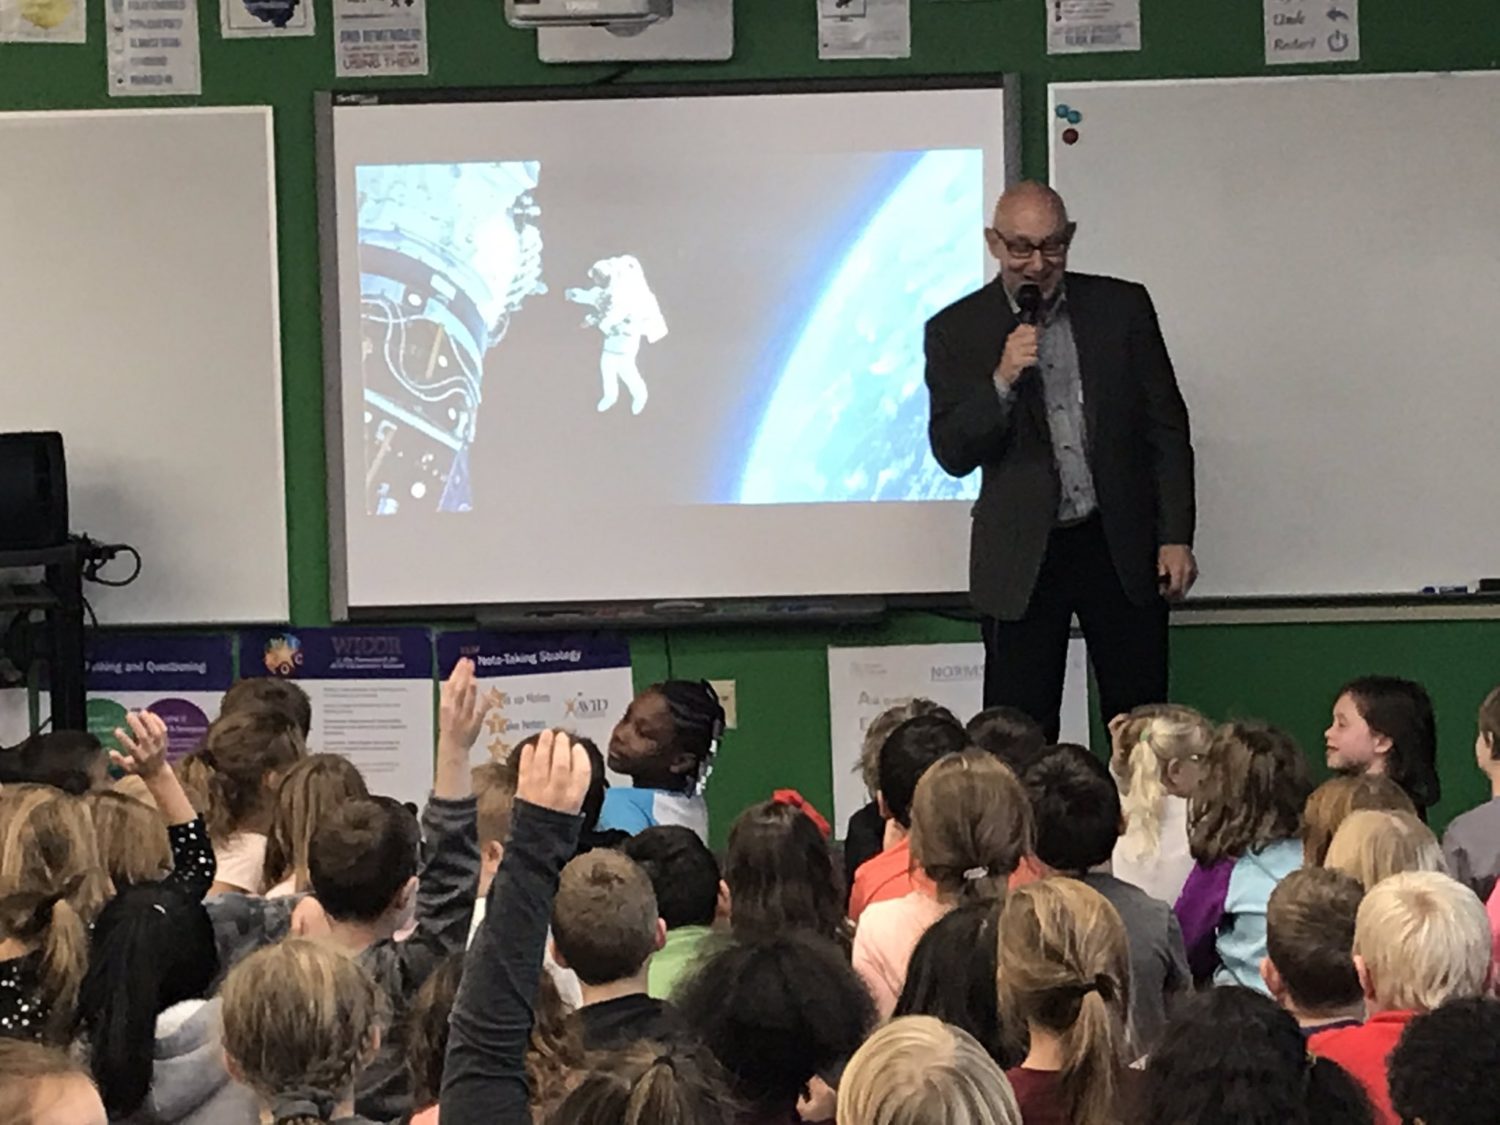 Dean Robbins presents "The Astronaut Who Painted the Moon: The True Story of Alan Bean" at South Park School in Milwaukee, Wisconsin